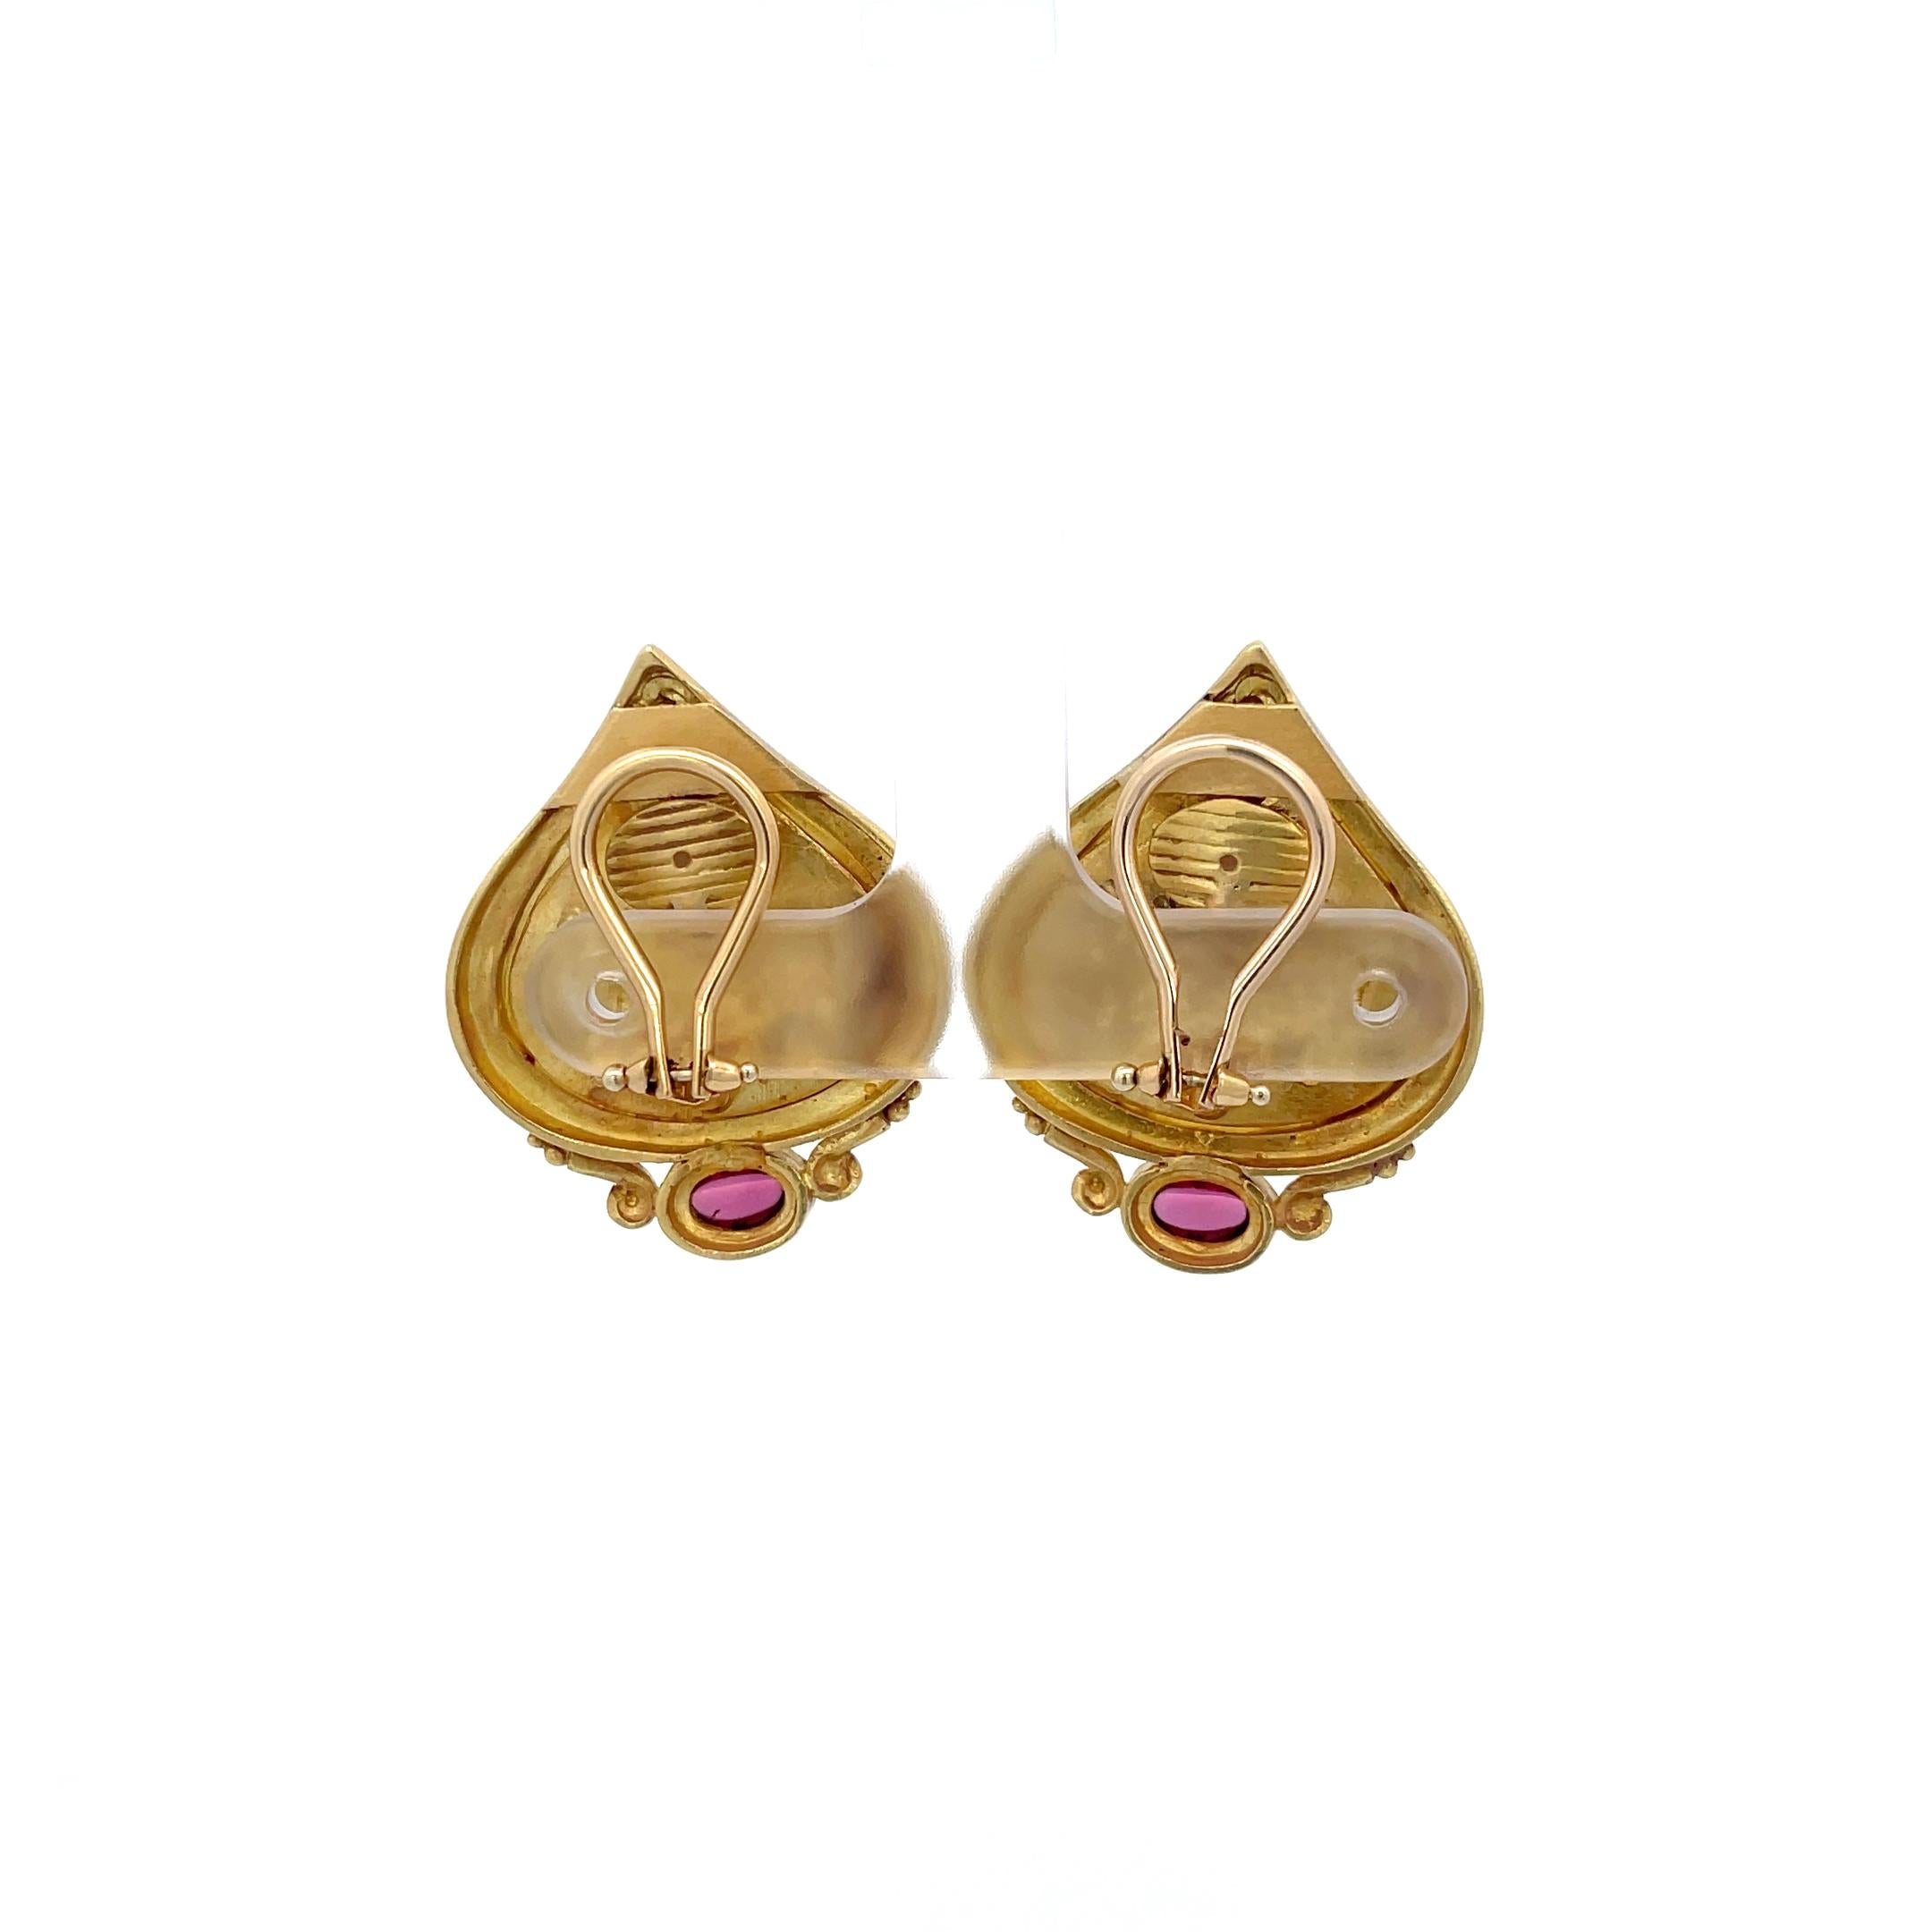 Seidengang Horse Scene Pink Tourmaline Earrings in 18K Yellow Gold. The earrings feature two bezel set oval cabochon pink tourmalines. Omega backs. 
18.21 Grams
1.25